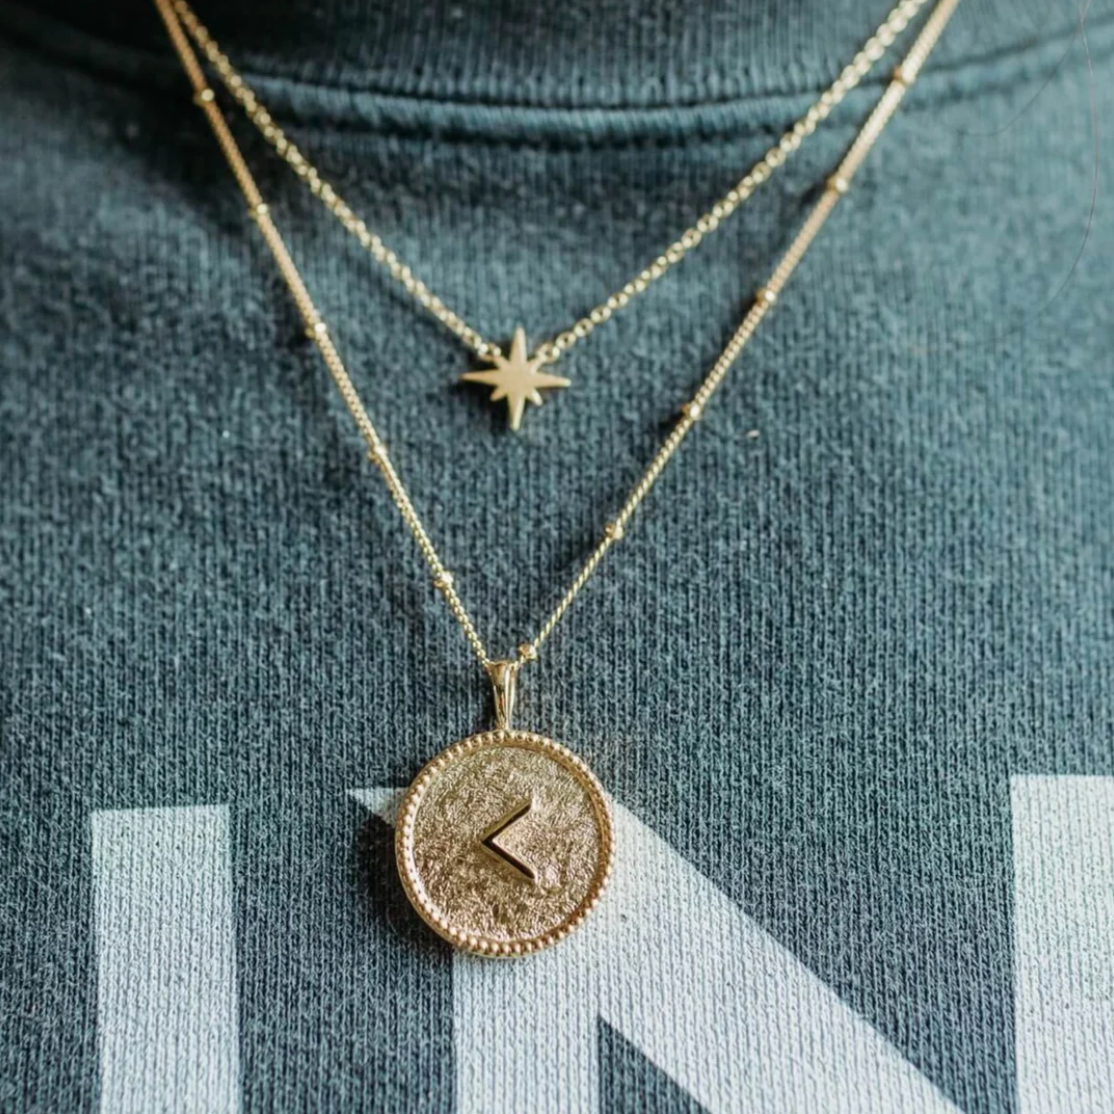 CLAIRE HILL DESIGNS "KIND" SHORTHAND COIN NECKLACE